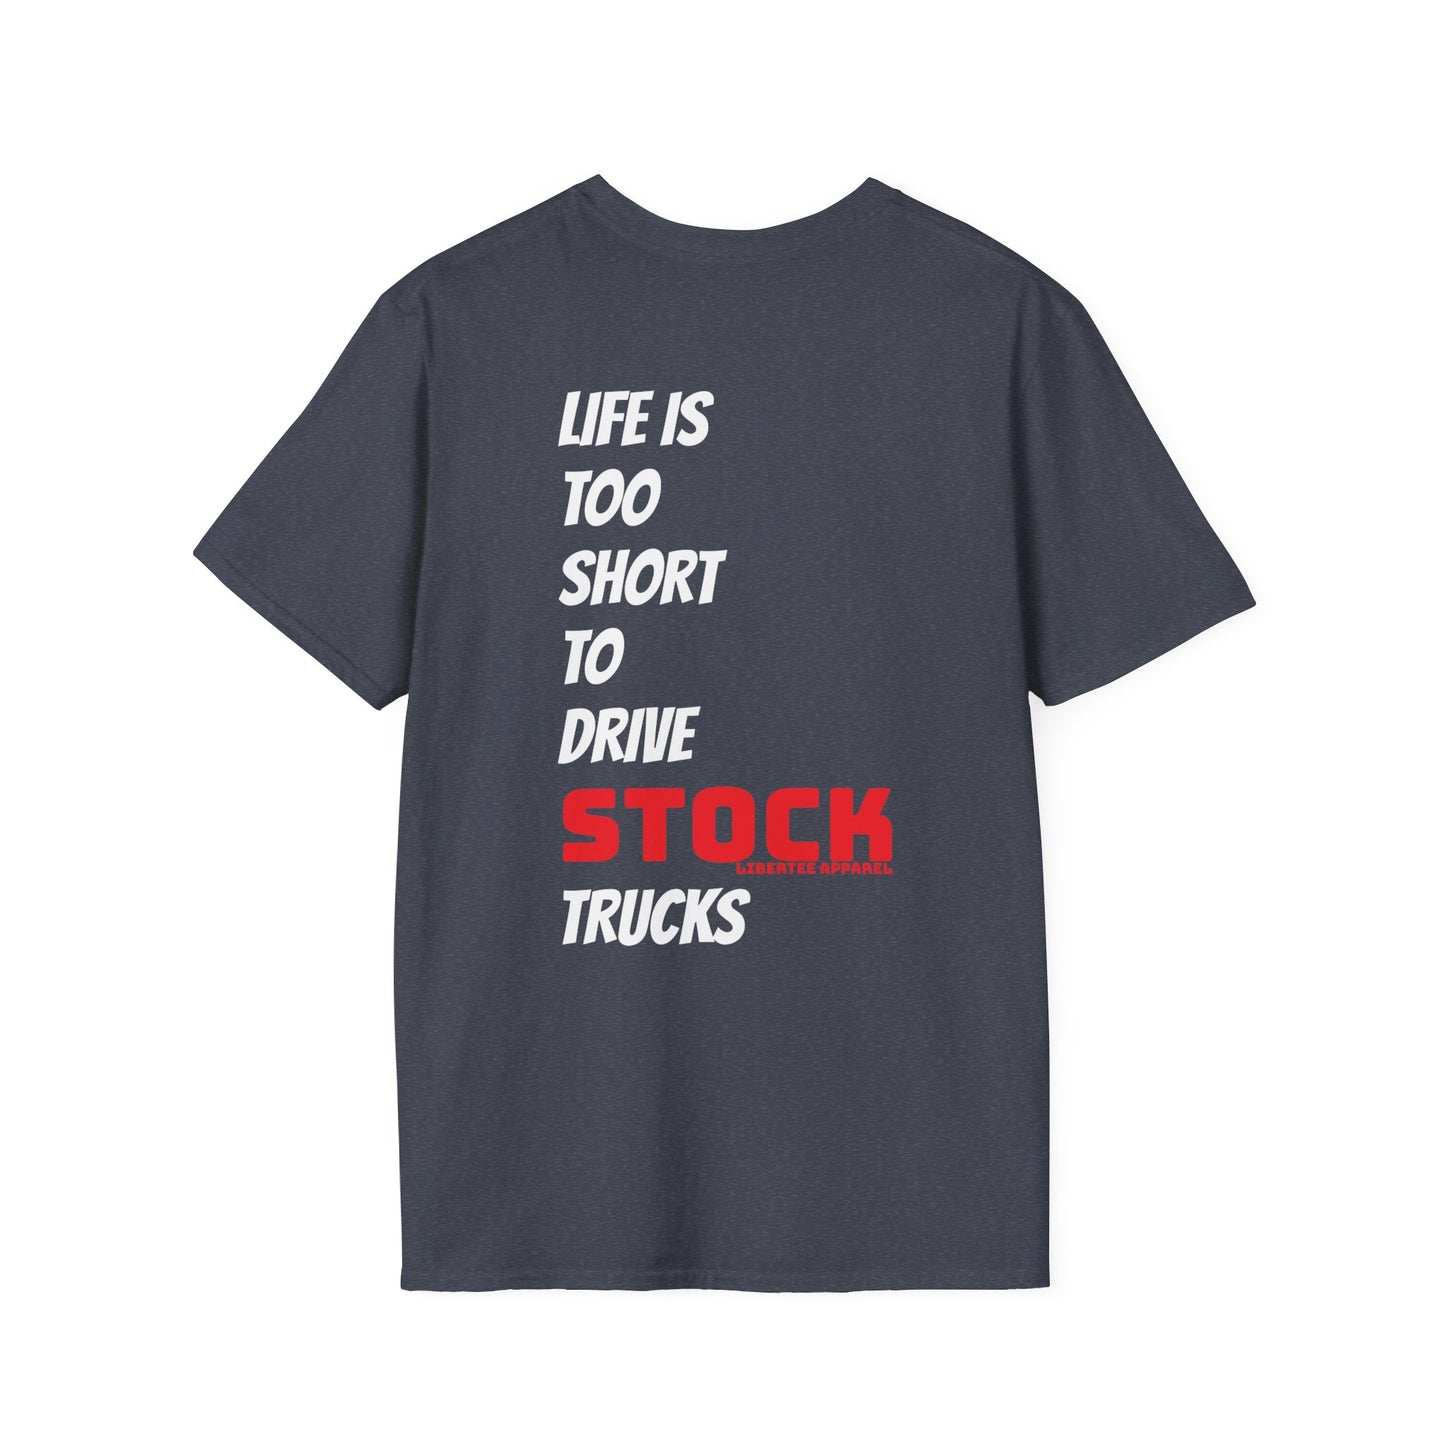 "LIFE IS TOO SHORT TO DRIVE STOCK TRUCKS